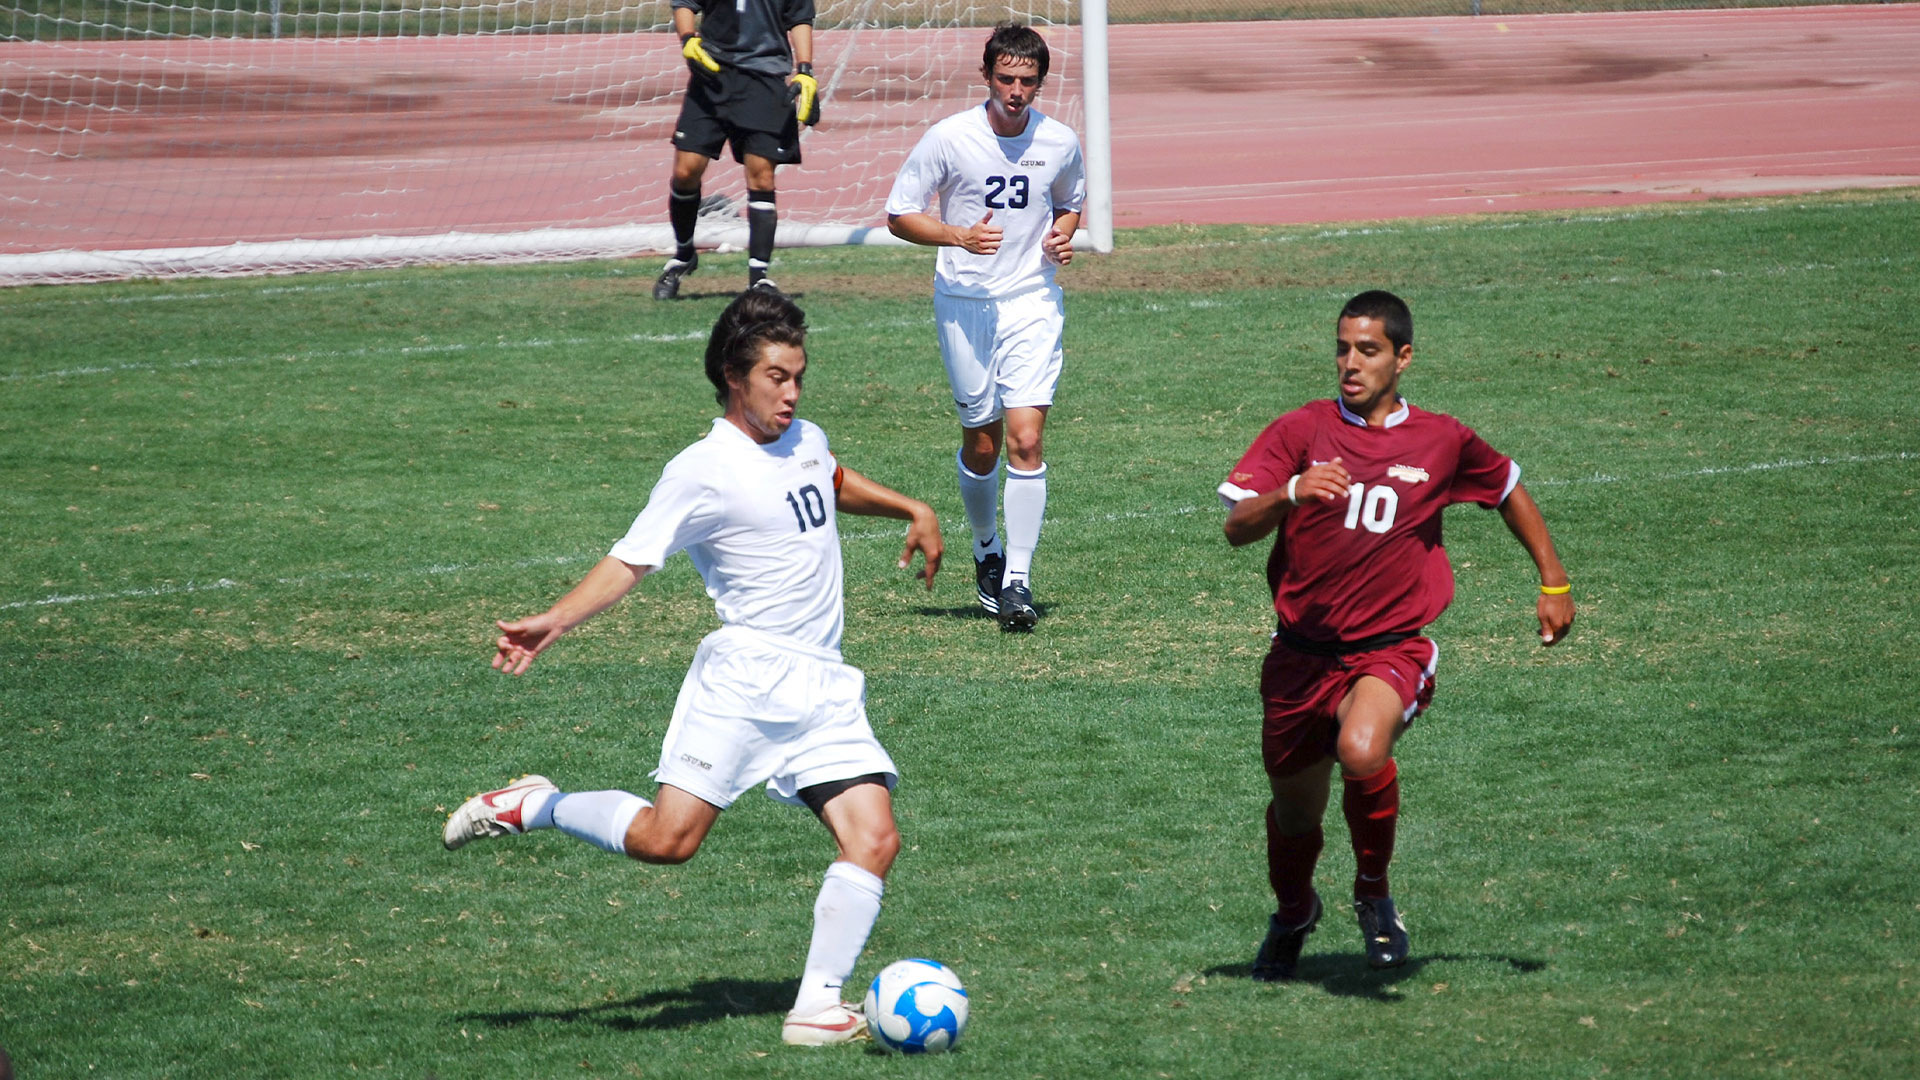 Photo: Previous CSUMB soccer player Kyle Satow about to kick a soccer ball while playing against another team